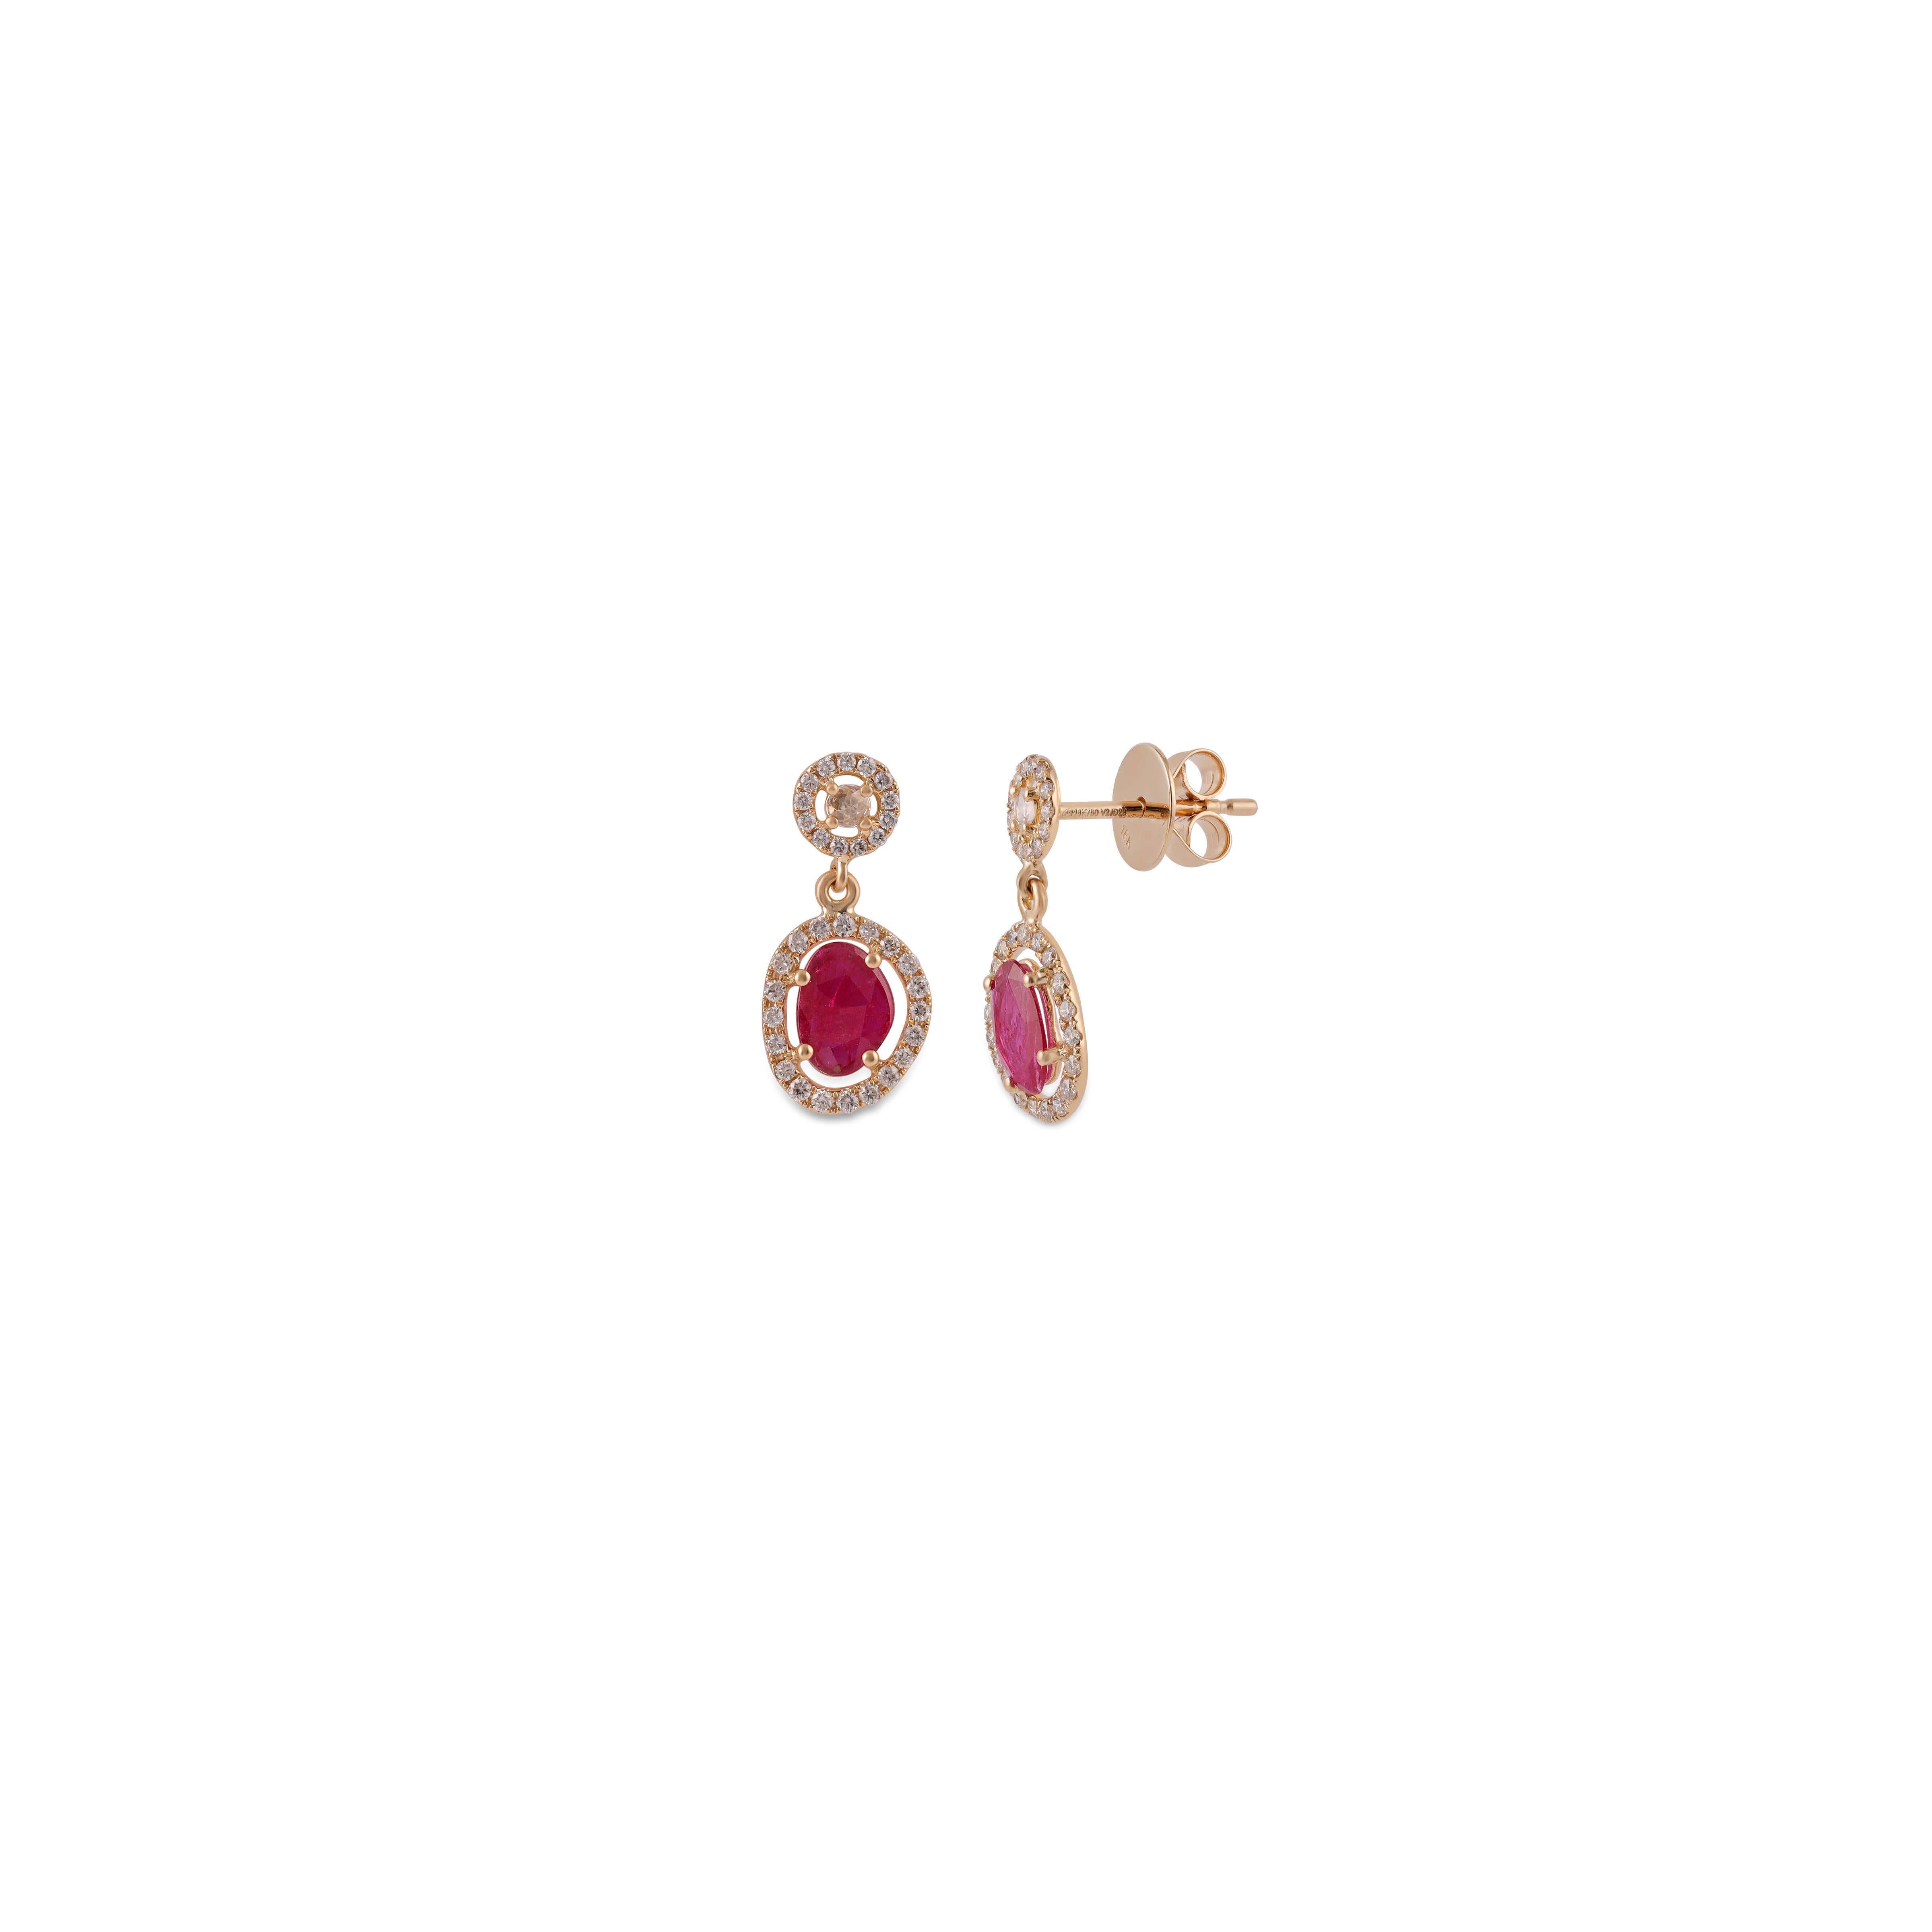 Contemporary 0.80 Carat Mozambique Ruby and Diamond Earring Studded in 18 Karat Yellow Gold For Sale